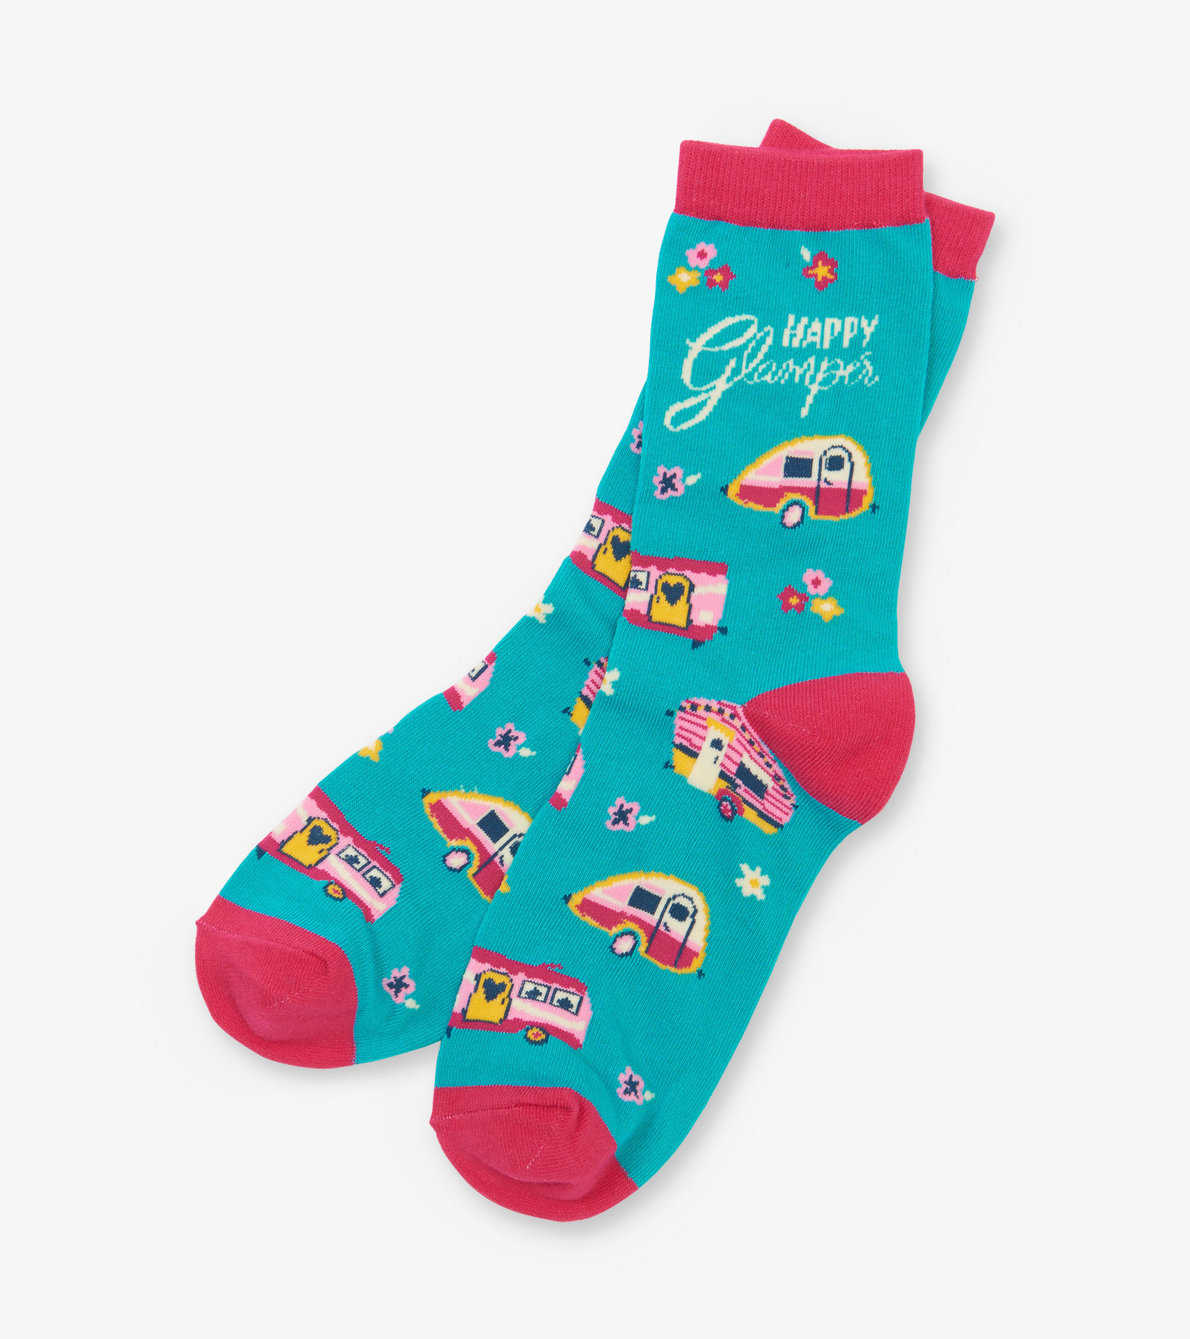 View larger image of Happy Glamper Women's Crew Socks